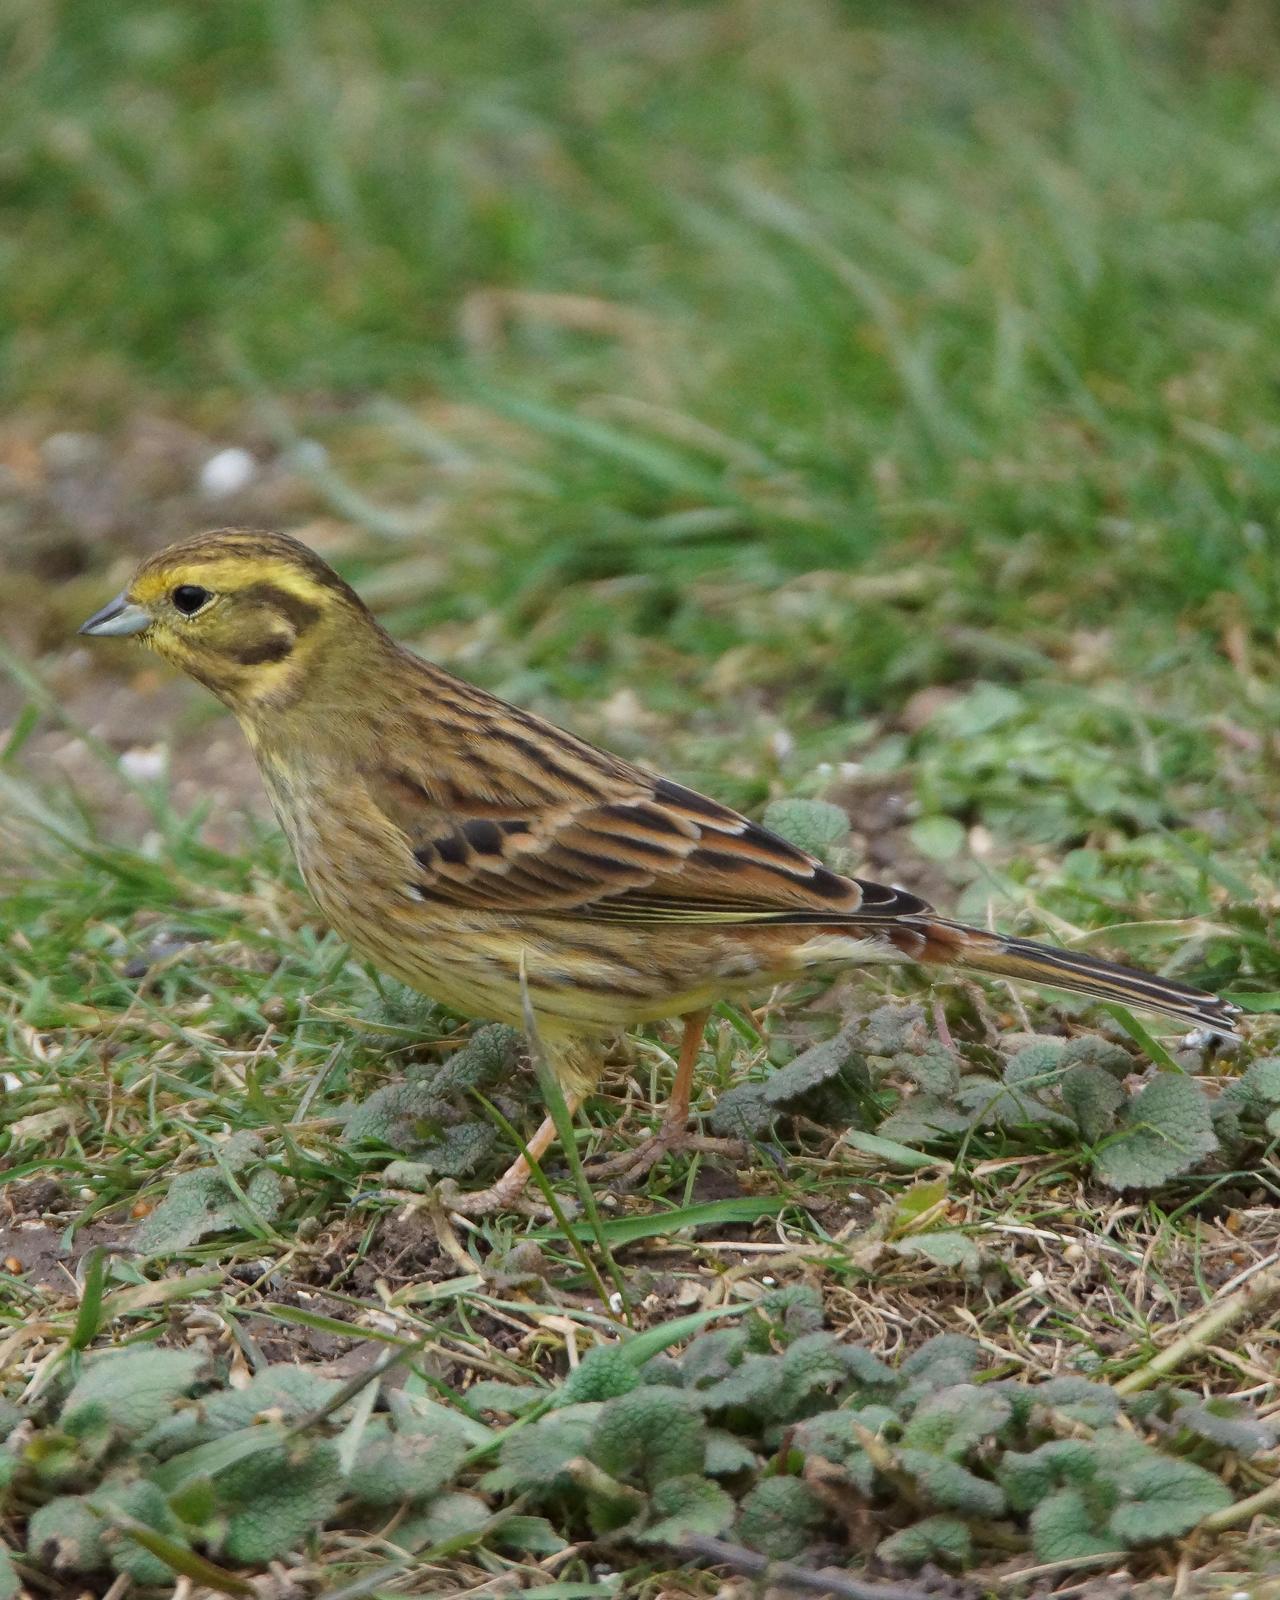 Yellowhammer Photo by Steve Percival